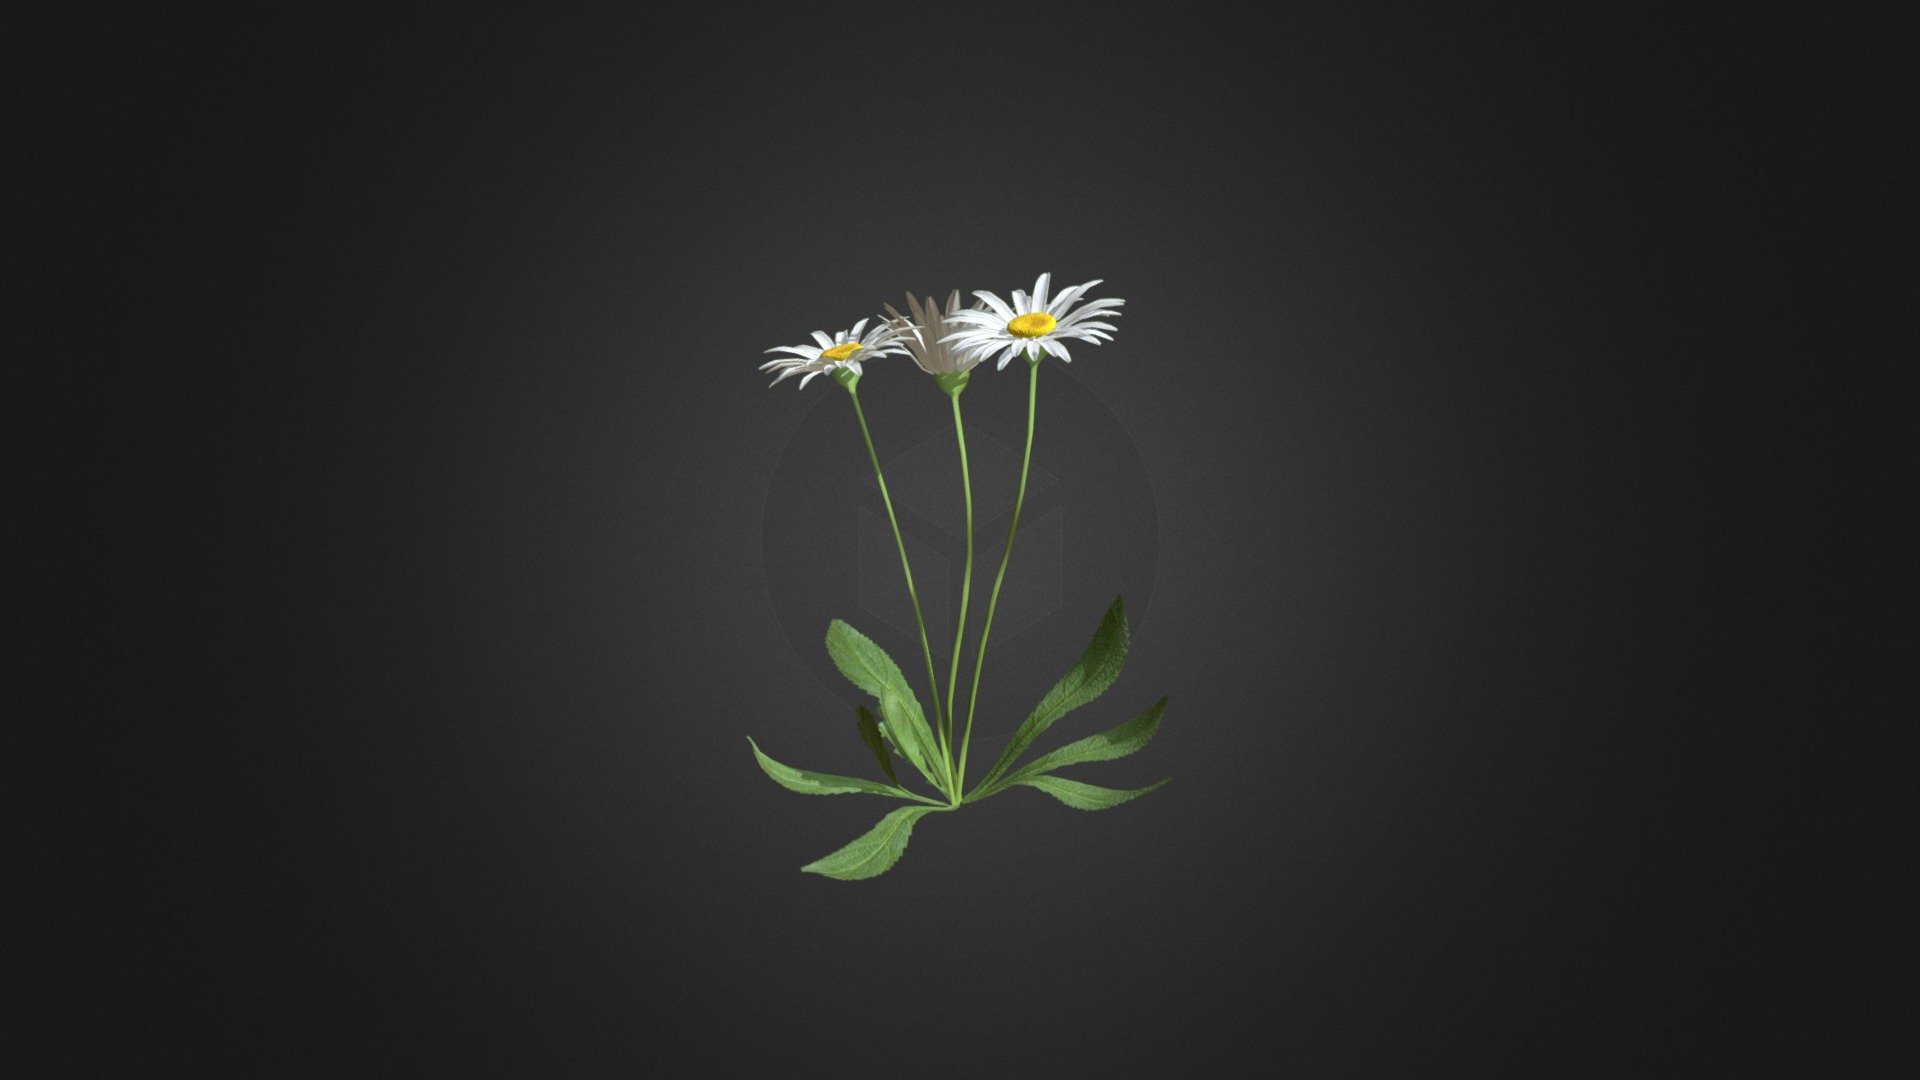 Daisies flowers (Bellis perennis) 3d model. Height: 18cm. Compatible with3ds max 2010 or higher, Cinema 4D and many more 3d model